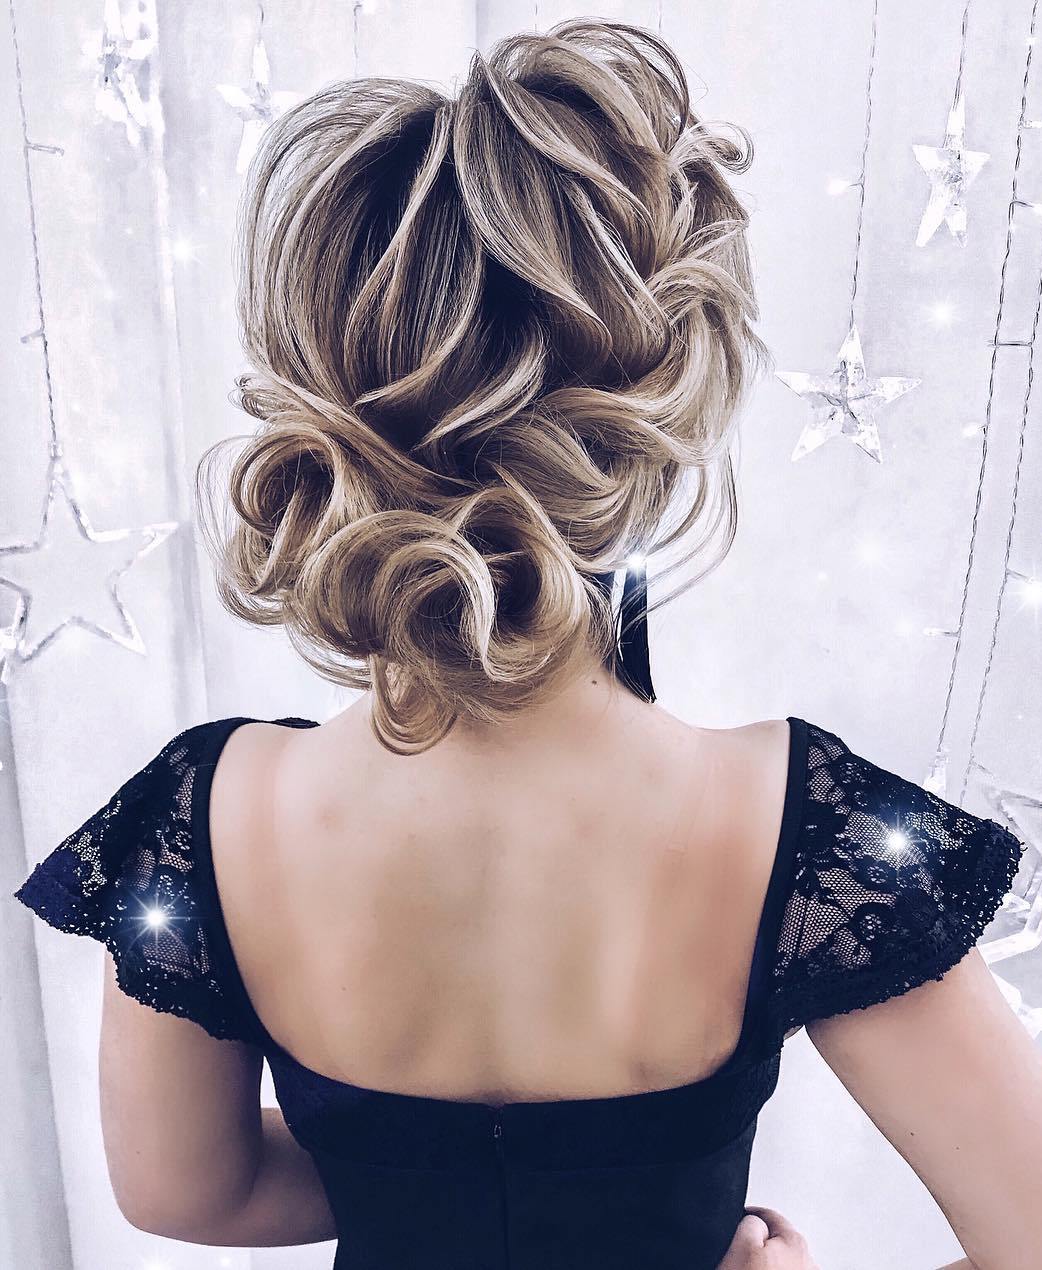 Prom Updo With A Side Braid For Long Hair